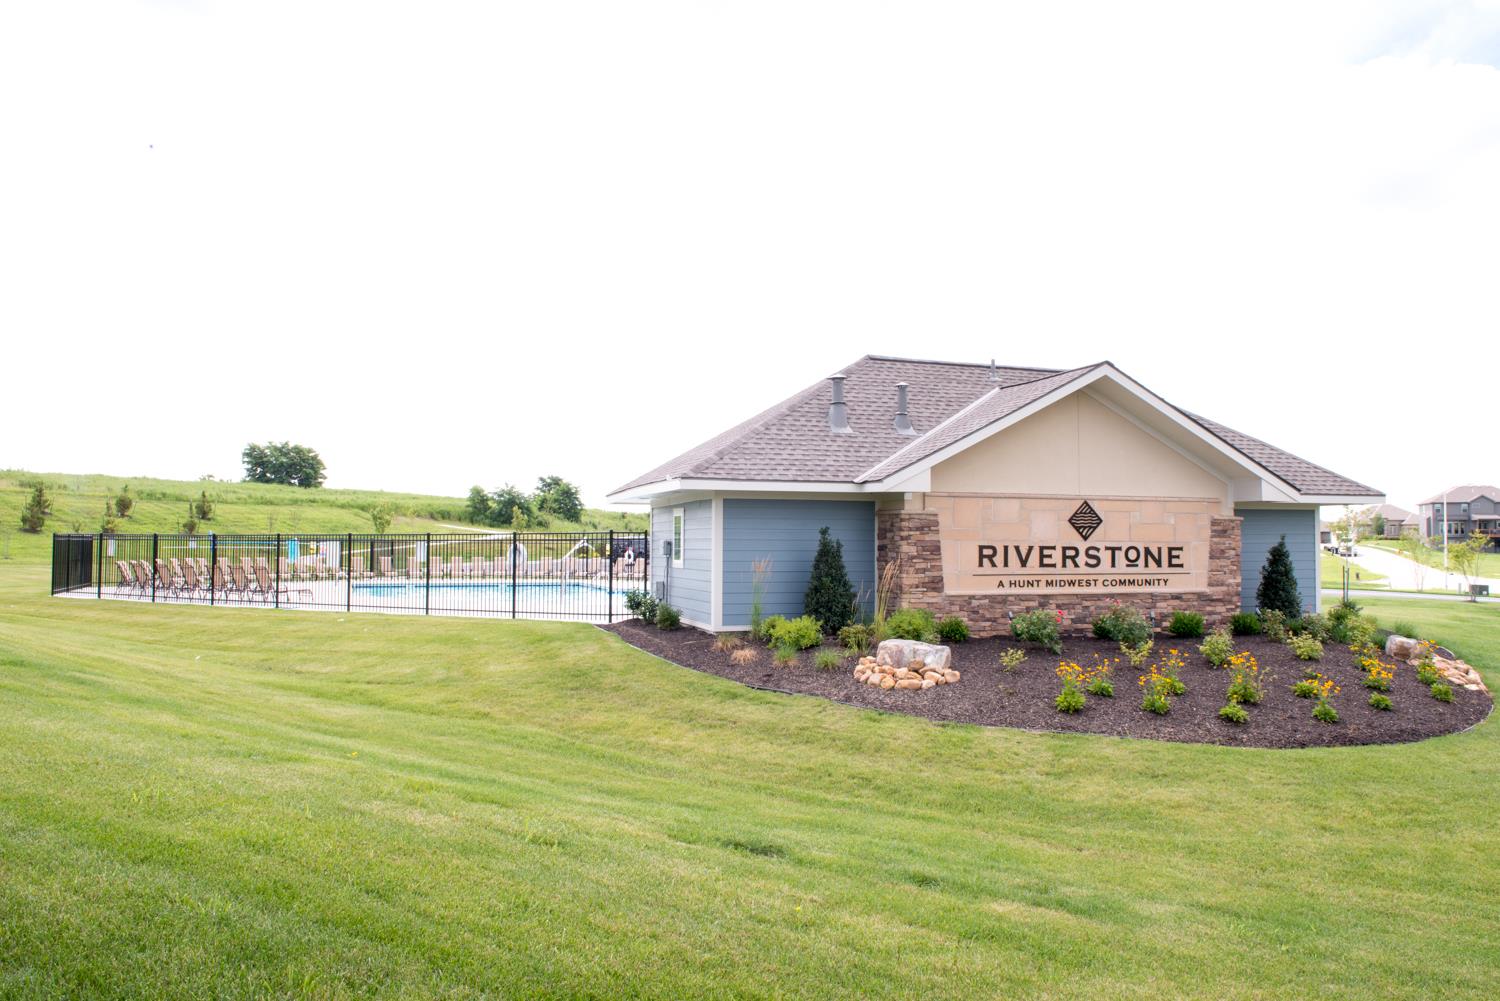 The Reserve at Riverstone new home community entry monument and swimming pool in Park Hill school district